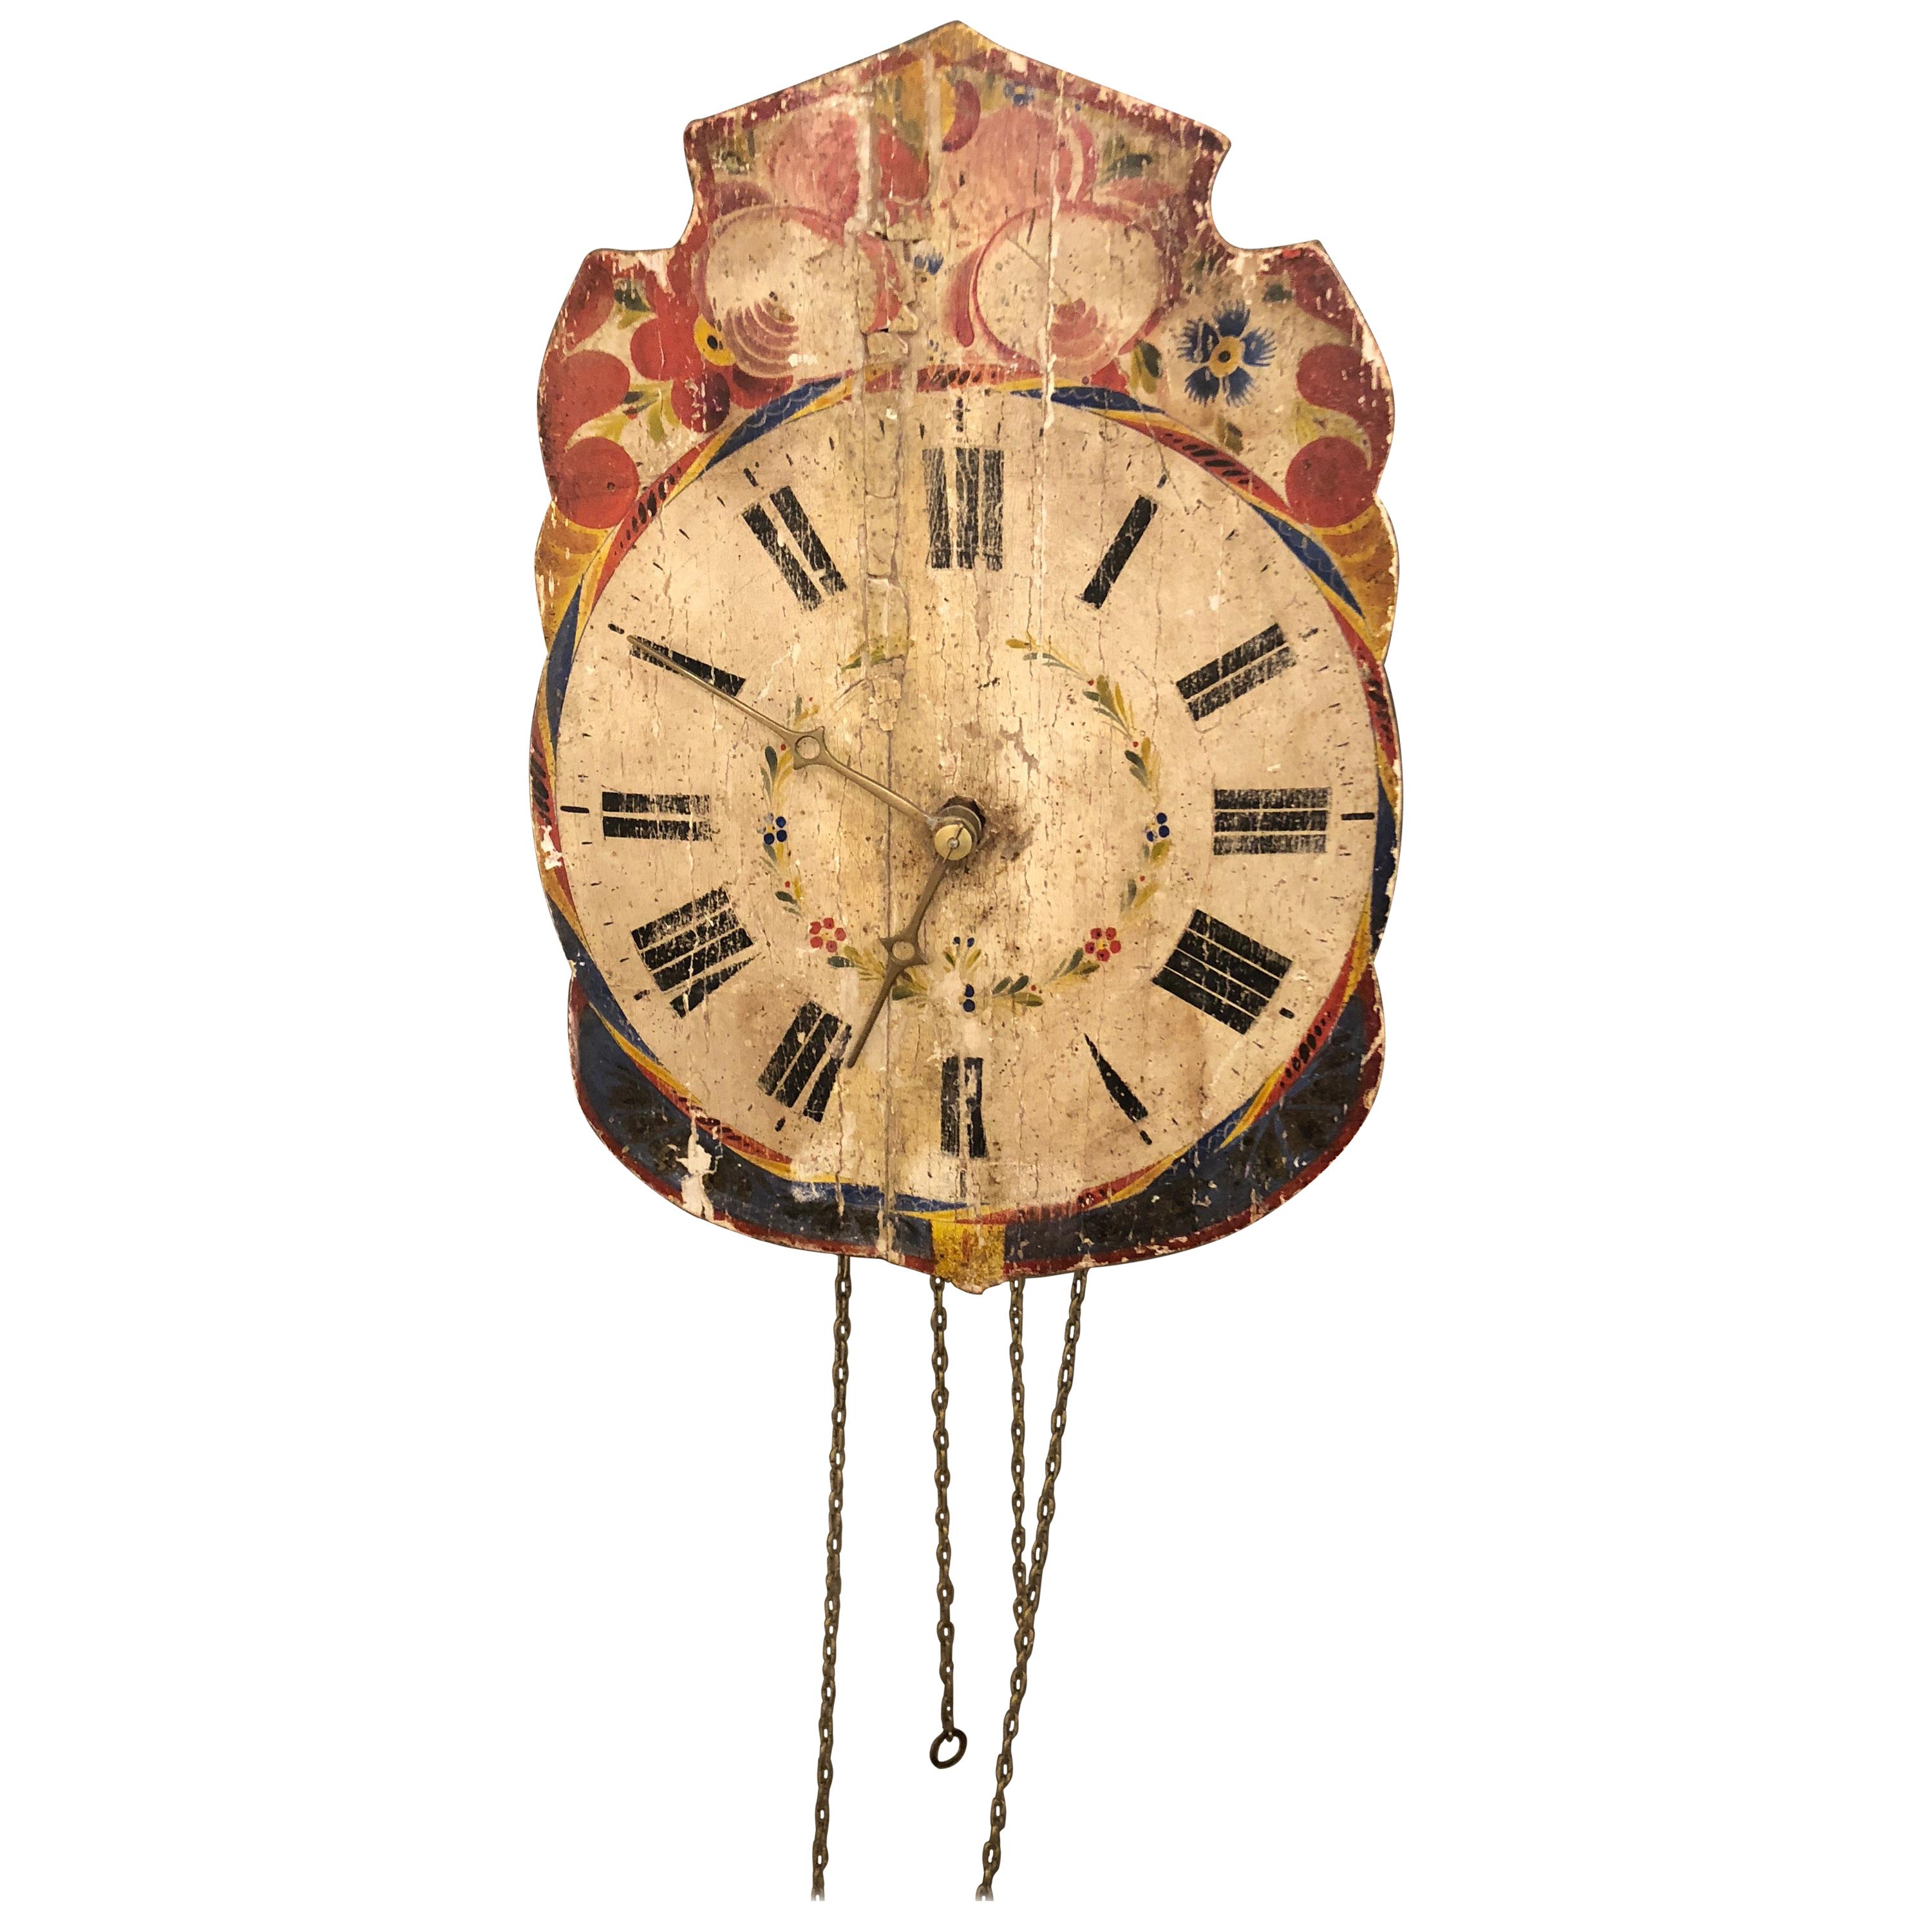 Super Old Folksy Painted Wooden Clock